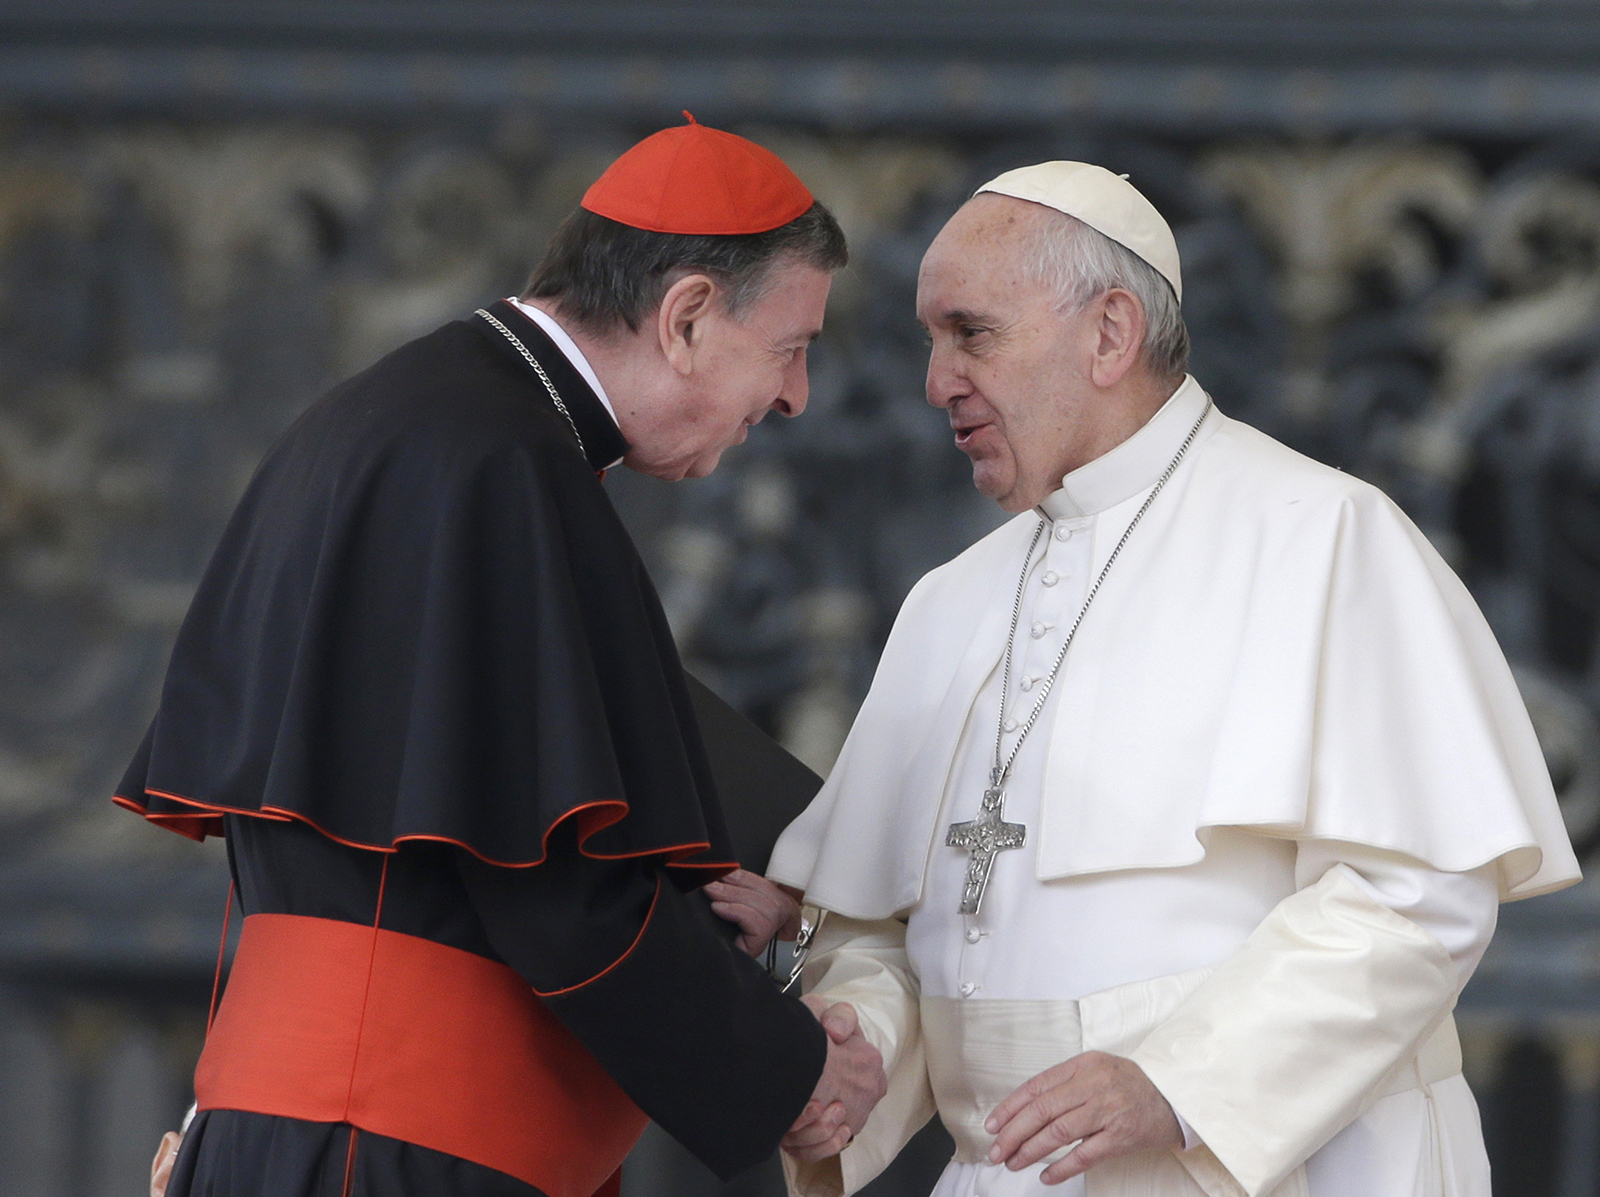 Pope Francis greets Cardinal Kurt Koch during his weekly general audience in St. Peter's Square at the Vatican, Wednesday, Oct. 28, 2015. (AP Photo/Alessandra Tarantino)